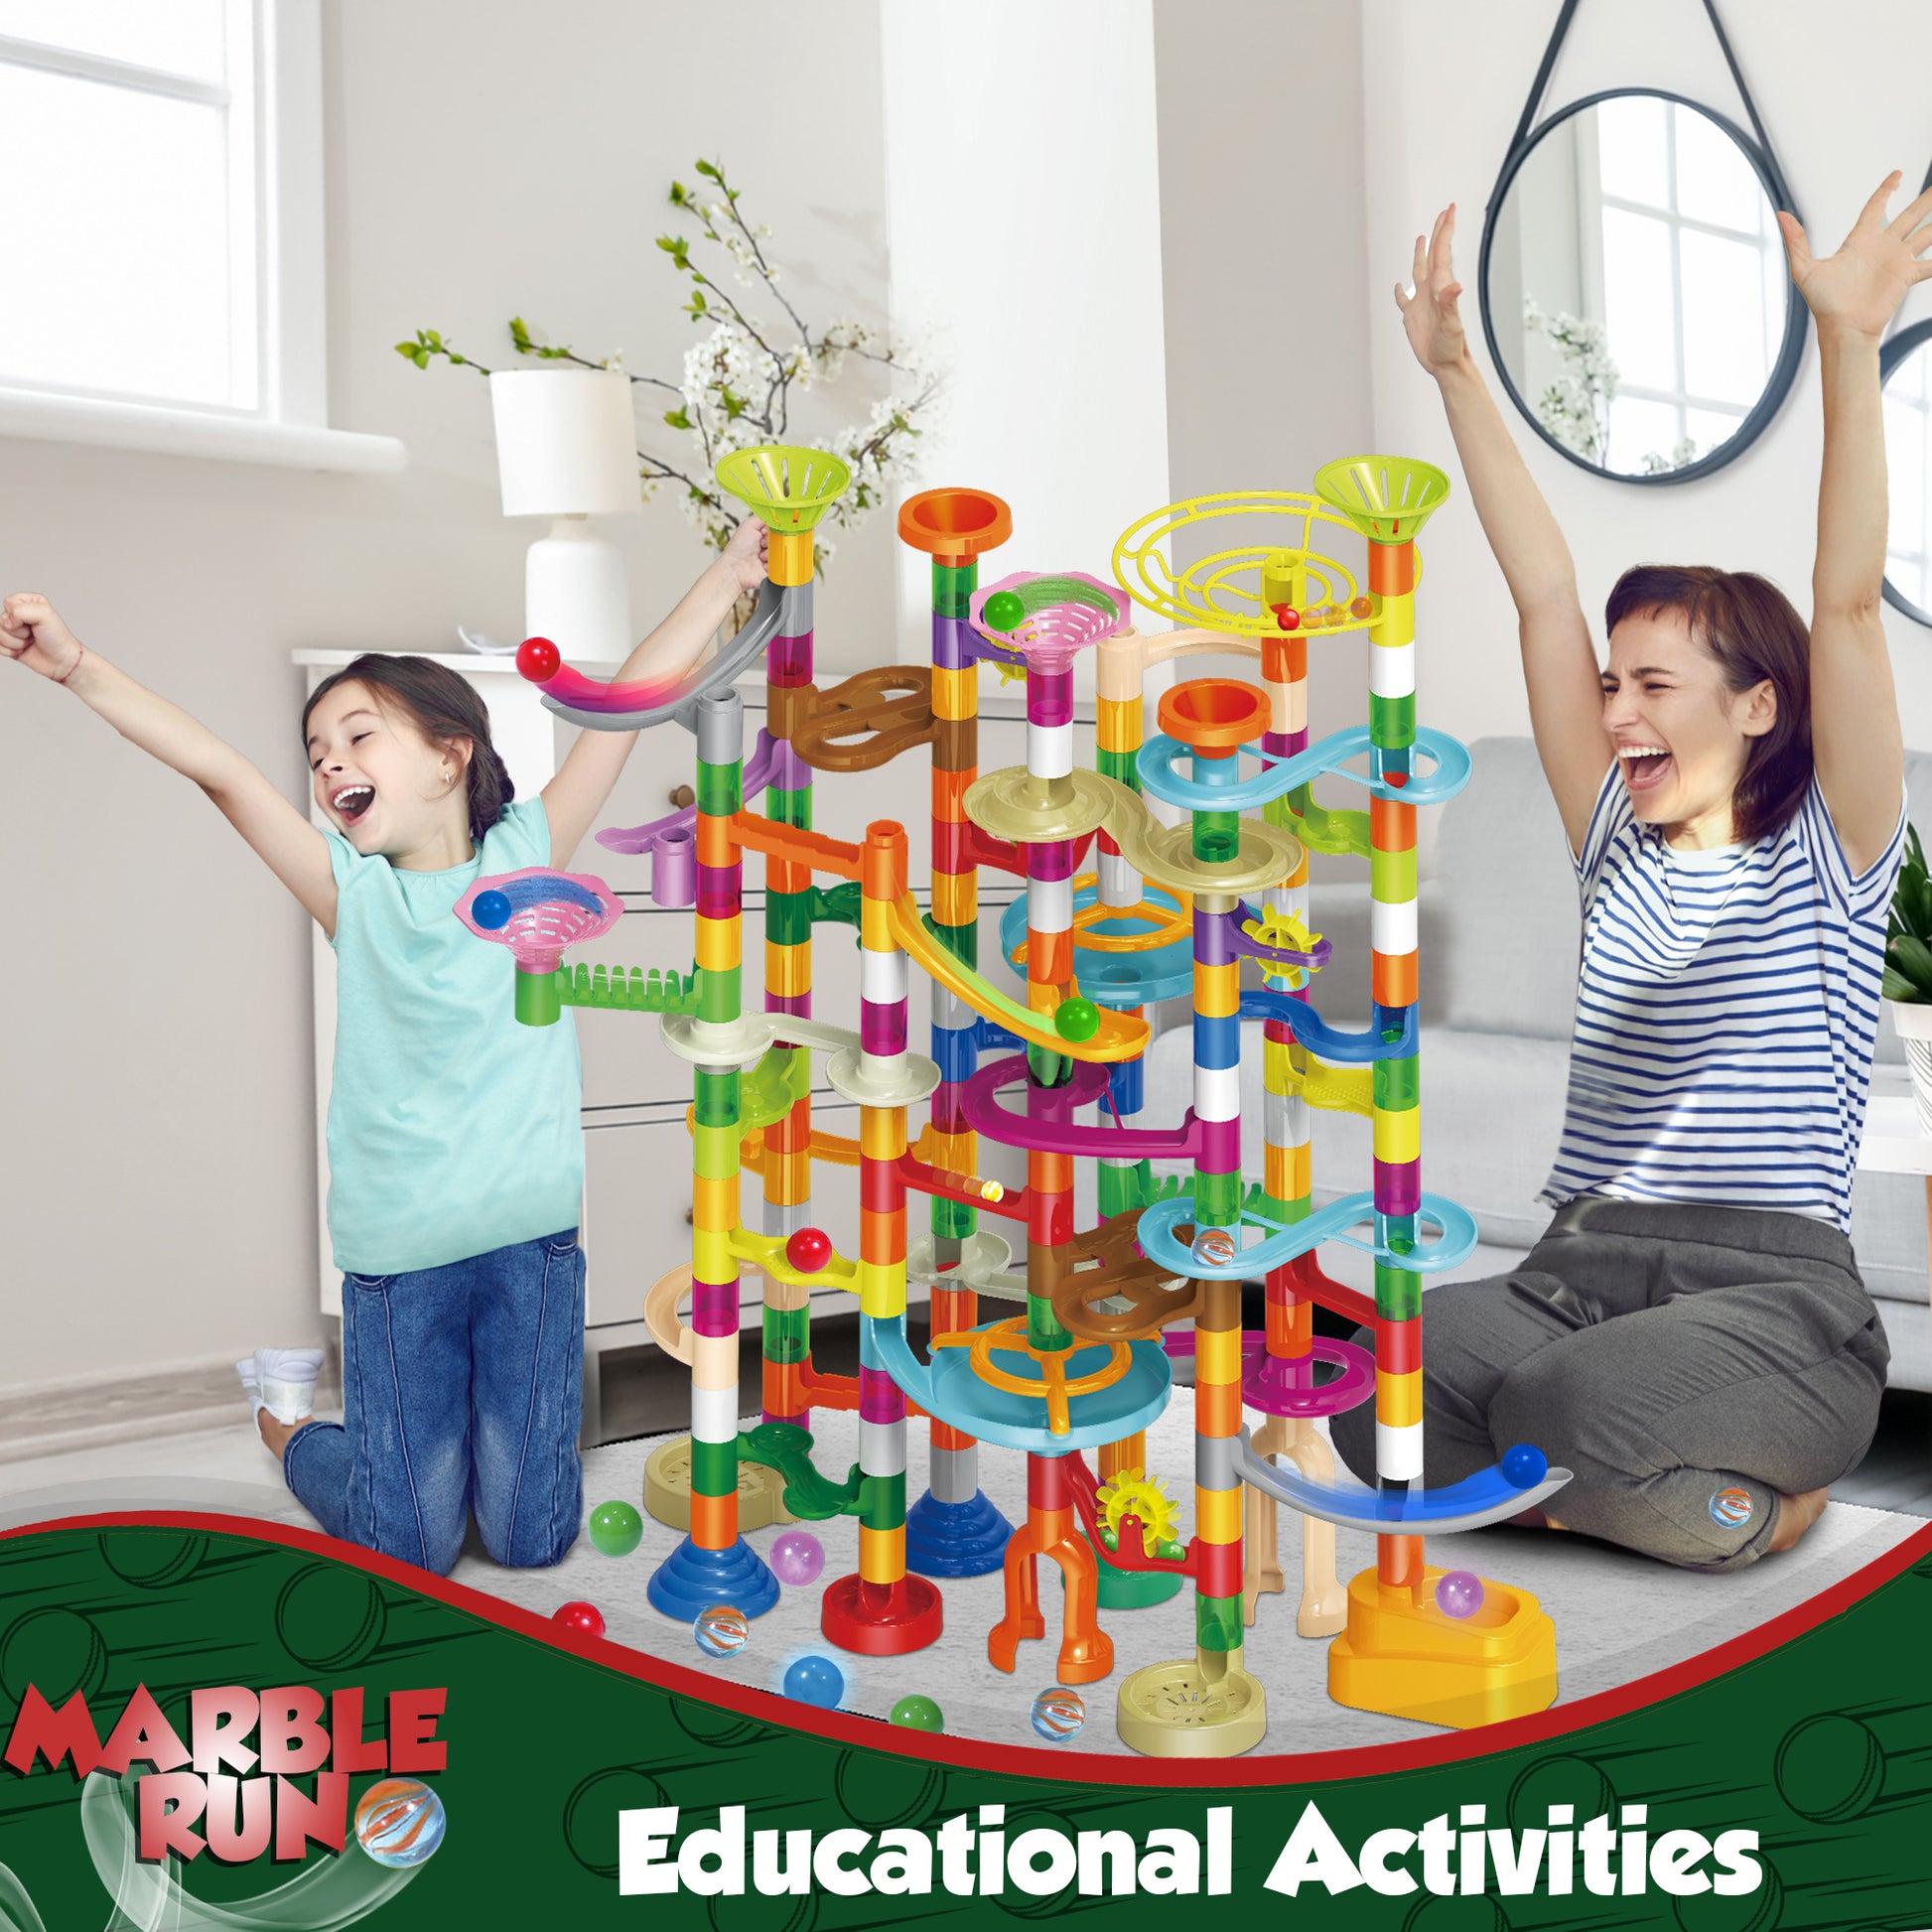 Marble Fun Toy Set for Educational Play